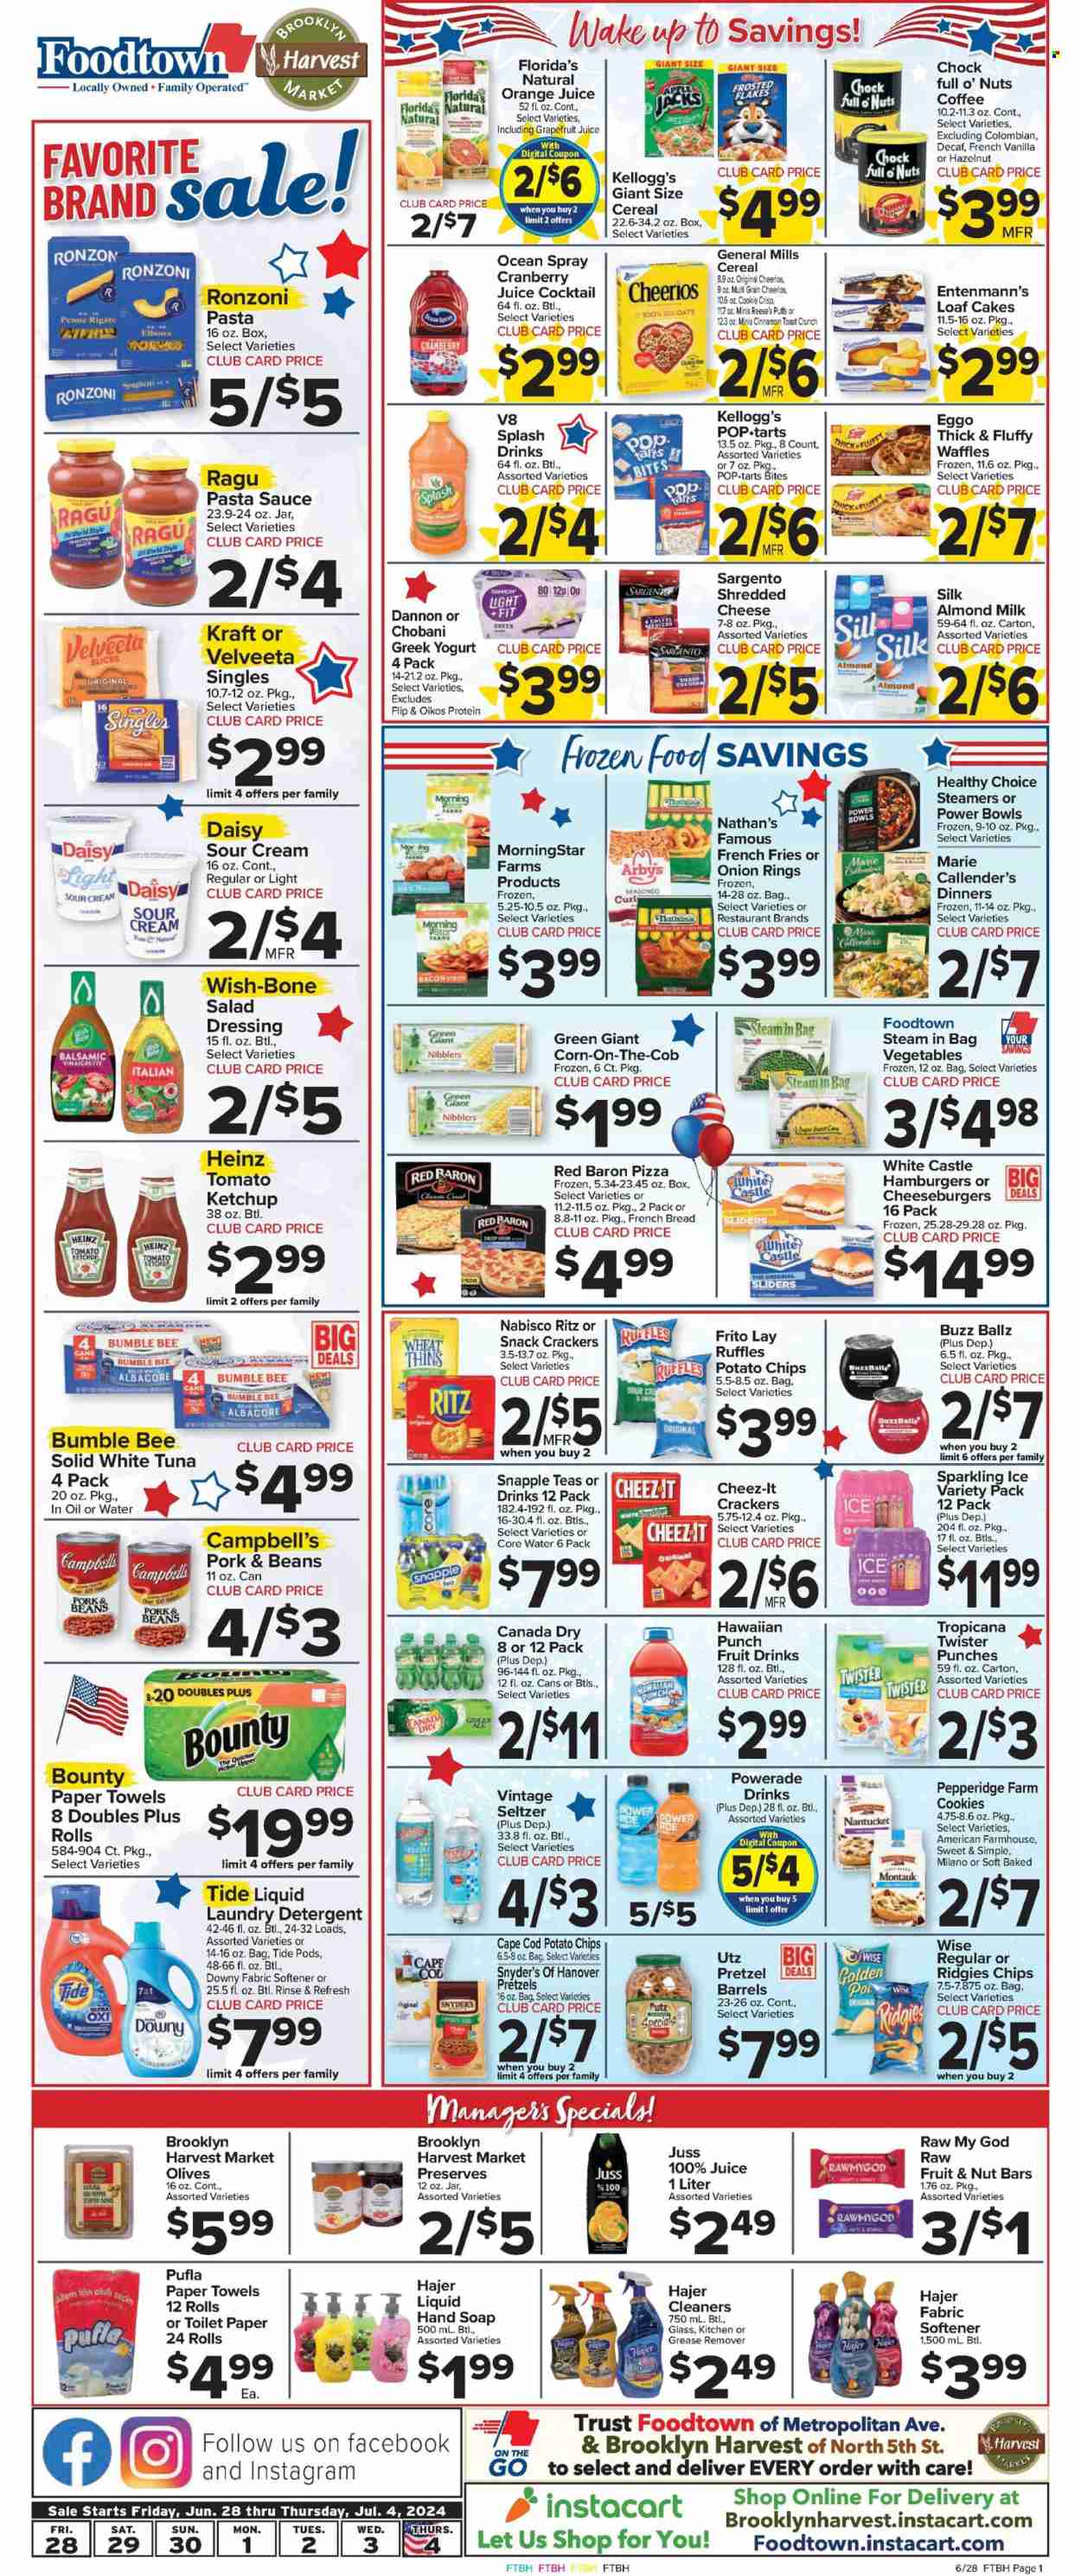 thumbnail - Foodtown Flyer - 06/28/2024 - 07/04/2024 - Sales products - bread, pretzels, cake, french bread, puffs, waffles, loaf cake, Entenmann's, corn, sweet corn, red peppers, tuna, Campbell's, spaghetti, pizza, pasta sauce, onion rings, hamburger, Bumble Bee, cheeseburger, MorningStar Farms, Healthy Choice, Marie Callender's, Kraft®, spaghetti sauce, ready meal, plant based ready meal, plant based product, shredded cheese, Sargento, Velveeta, greek yoghurt, yoghurt, Oikos, Silk, Chobani, Dannon, snack bar, almond milk, plant-based milk, eggs, Reese's, frozen vegetables, potato fries, french fries, Red Baron, cookies, Bounty, crackers, Kellogg's, Pop-Tarts, Florida's Natural, RITZ, Nabisco, General Mills, potato chips, Cheez-It, Ruffles, salty snack, canned tuna, Heinz, canned fish, Cheerios, nut bar, Frosted Flakes, penne, salad dressing, ketchup, dressing, Canada Dry, cranberry juice, ginger ale, Powerade, orange juice, energy drink, fruit drink, Snapple, Tropicana Twister, seltzer water, flavored water, water, tea, coffee, beer, toilet paper, kitchen towels, paper towels, detergent, cleaner, Tide, fabric softener, laundry detergent, Downy Laundry, hand soap, Trust, Sharp. Page 3.